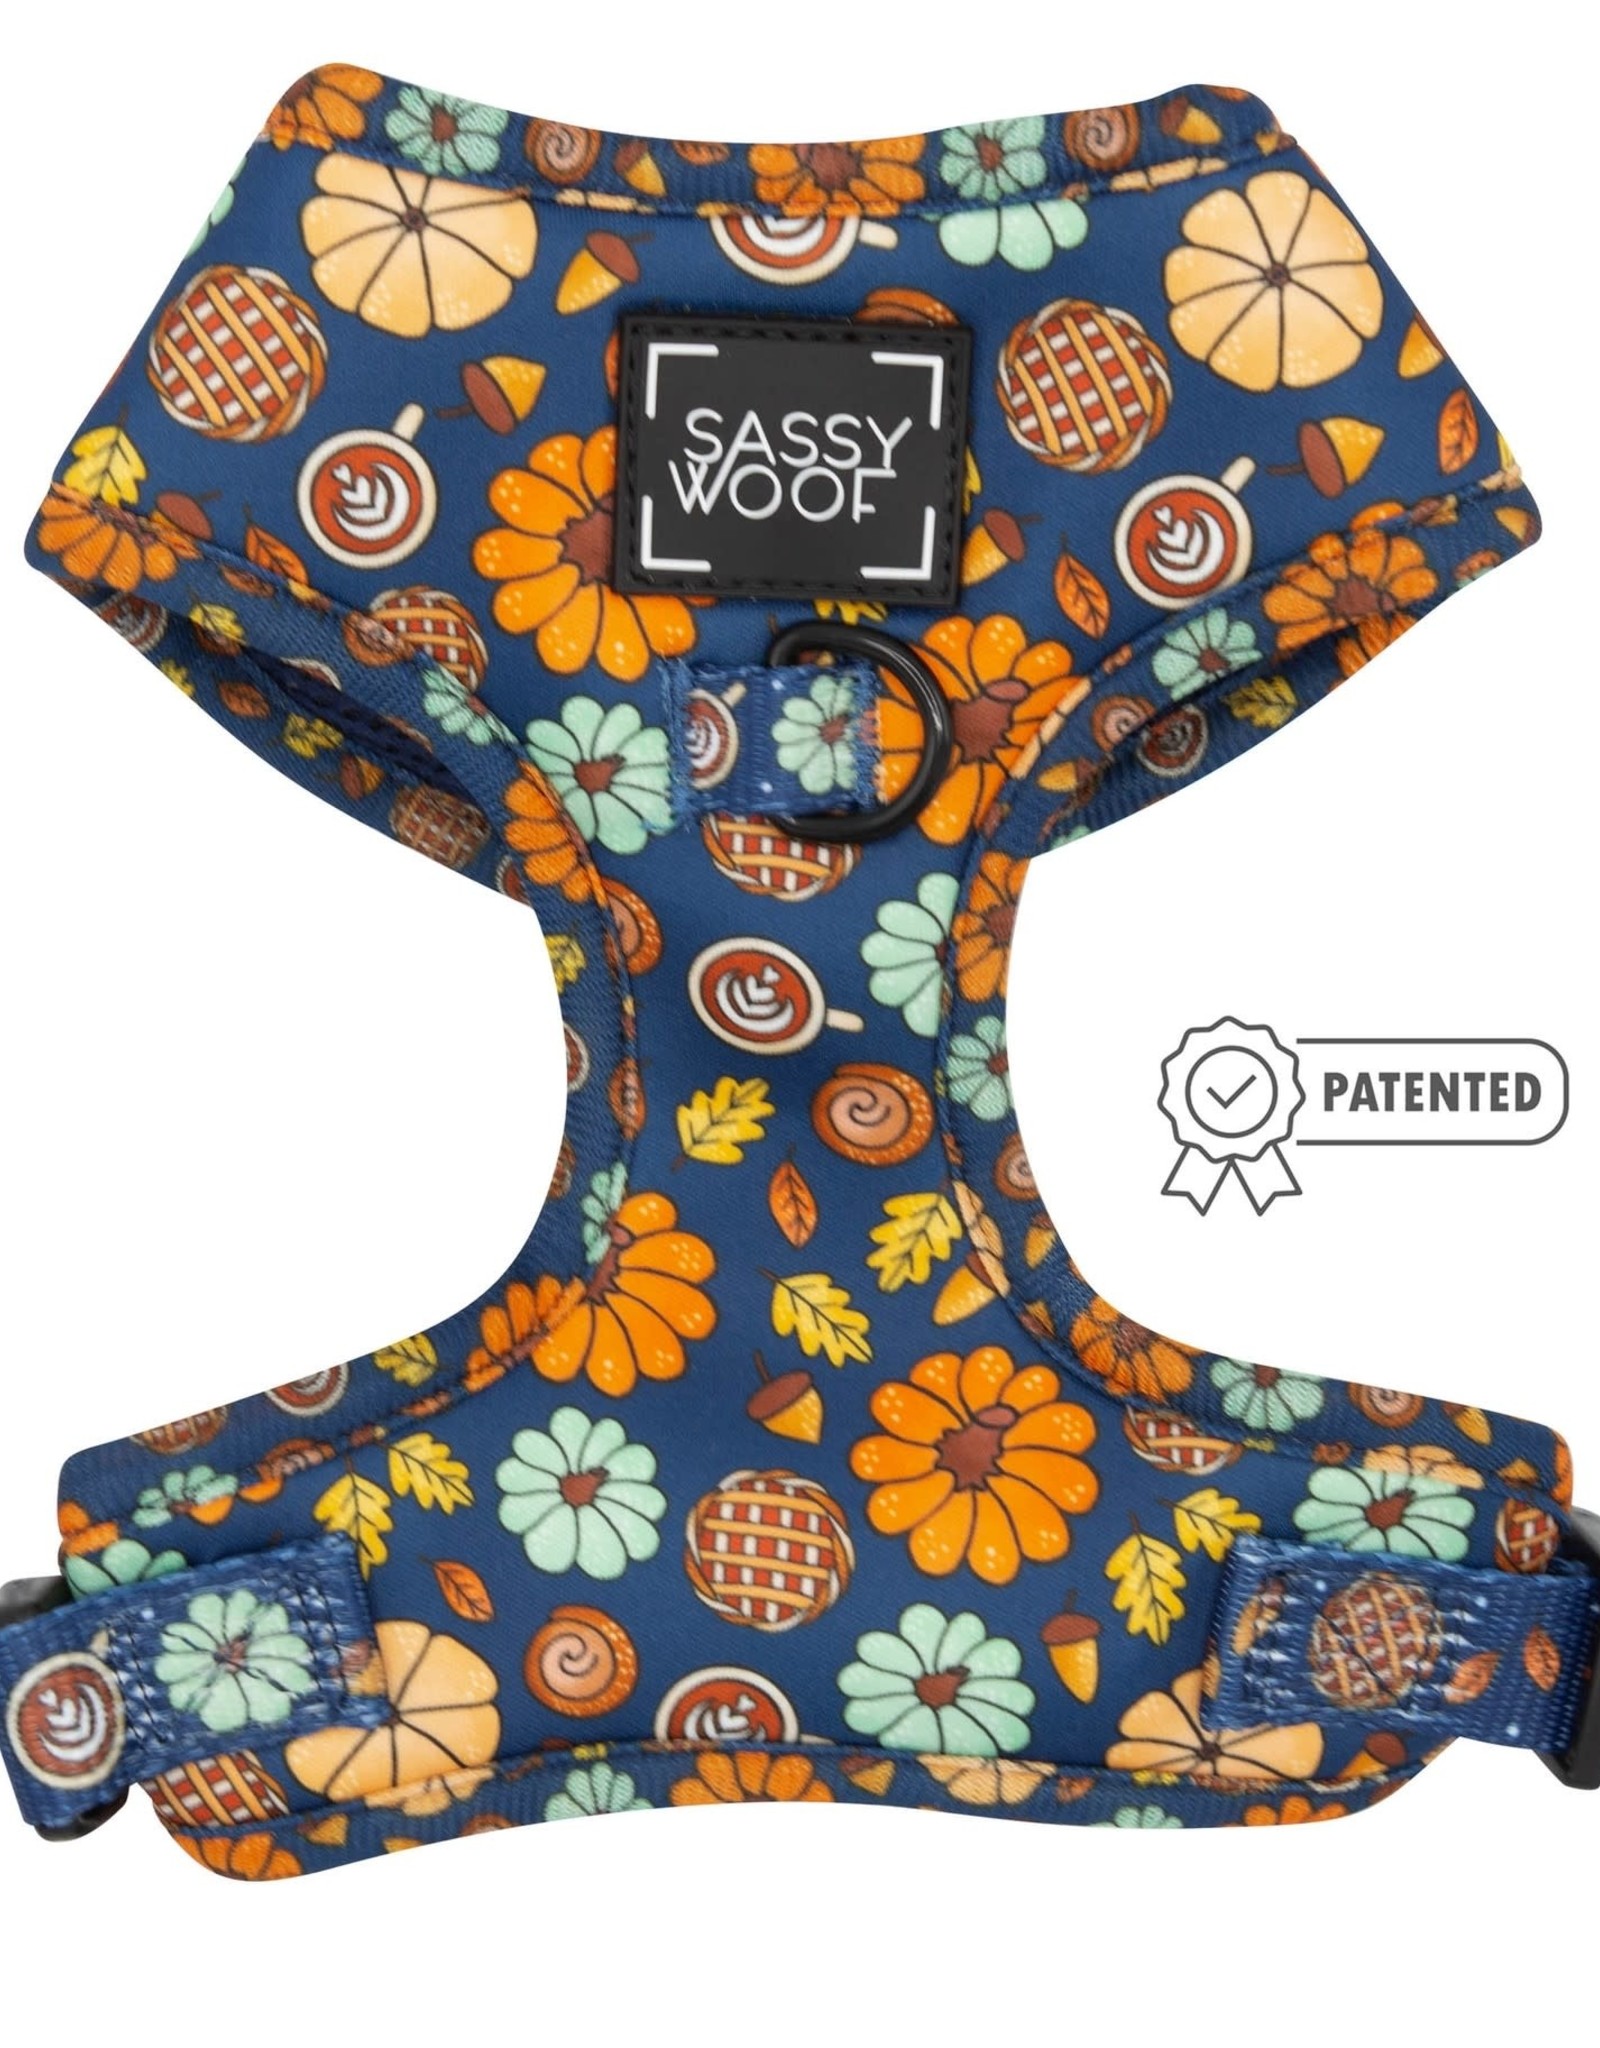 Sassy Woof Oh My Gourd Adjustable Dog Harness